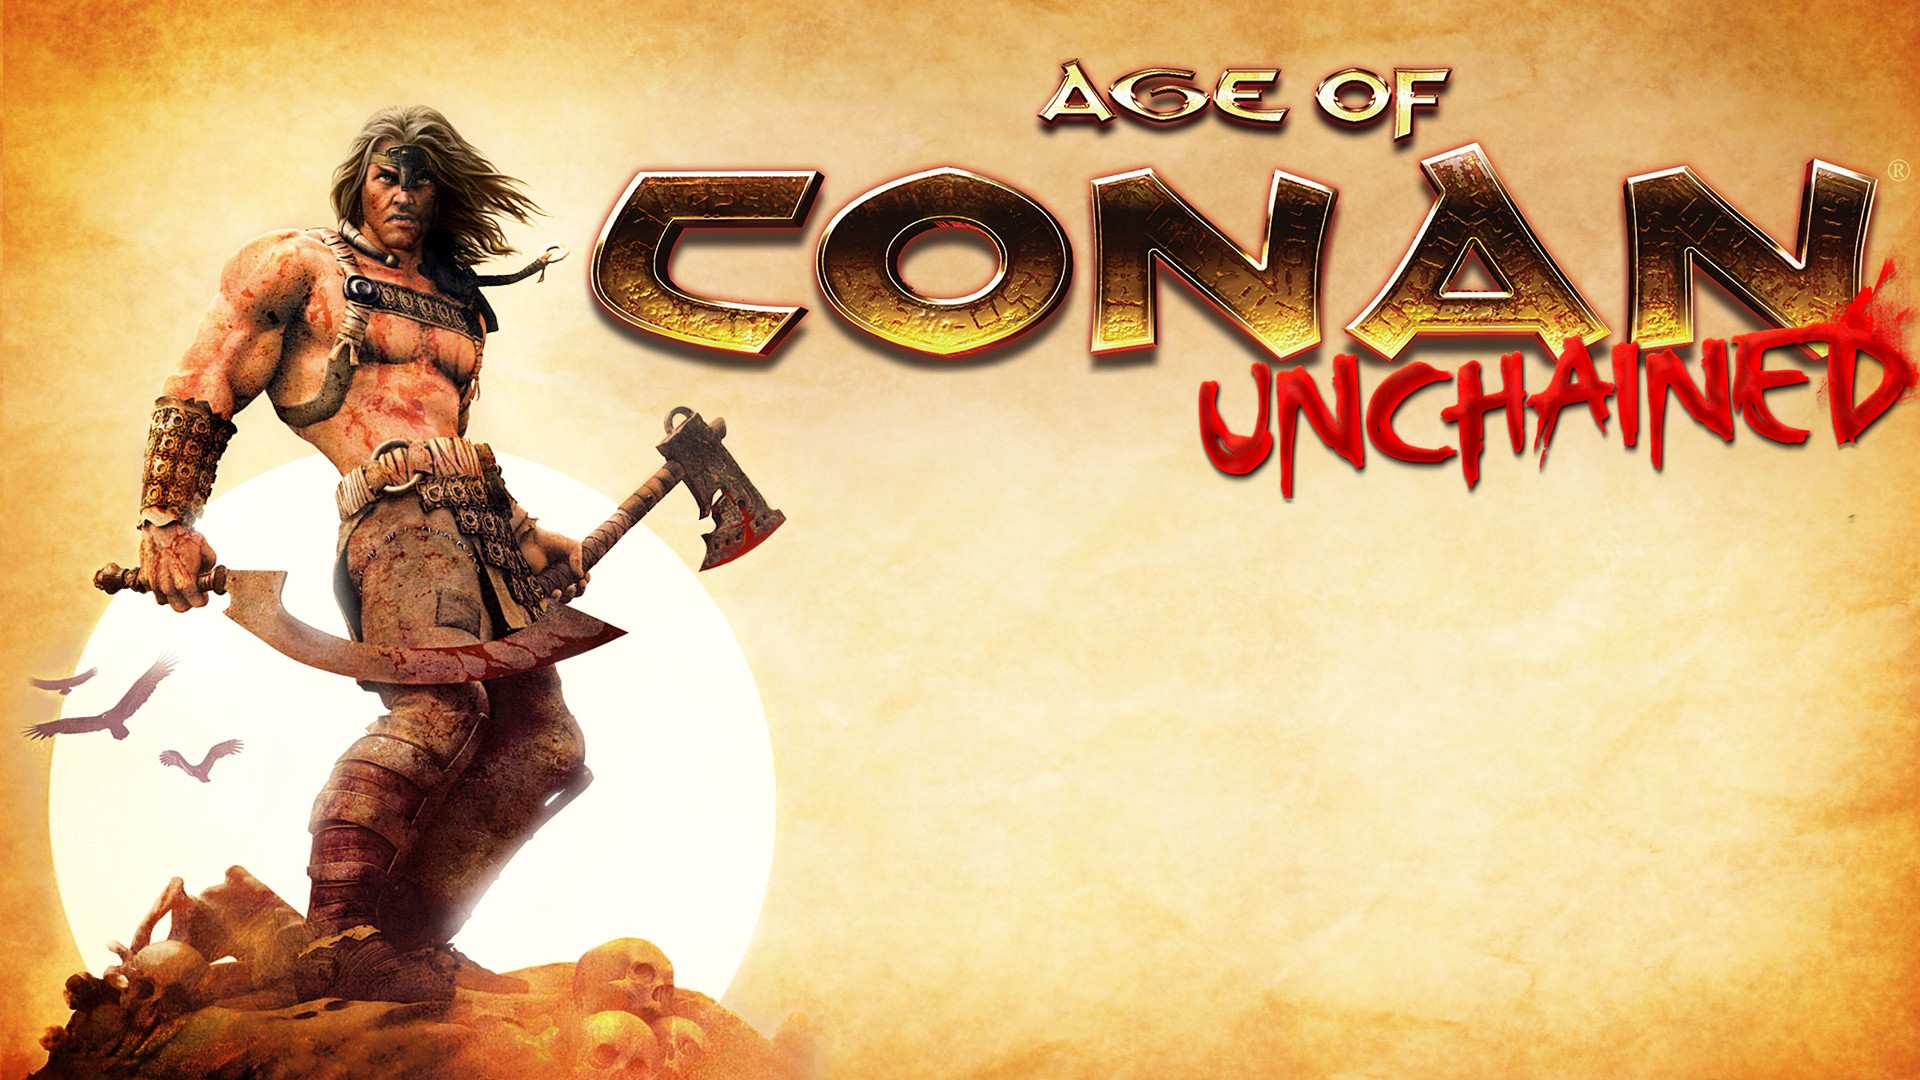 Age of conan unchained details